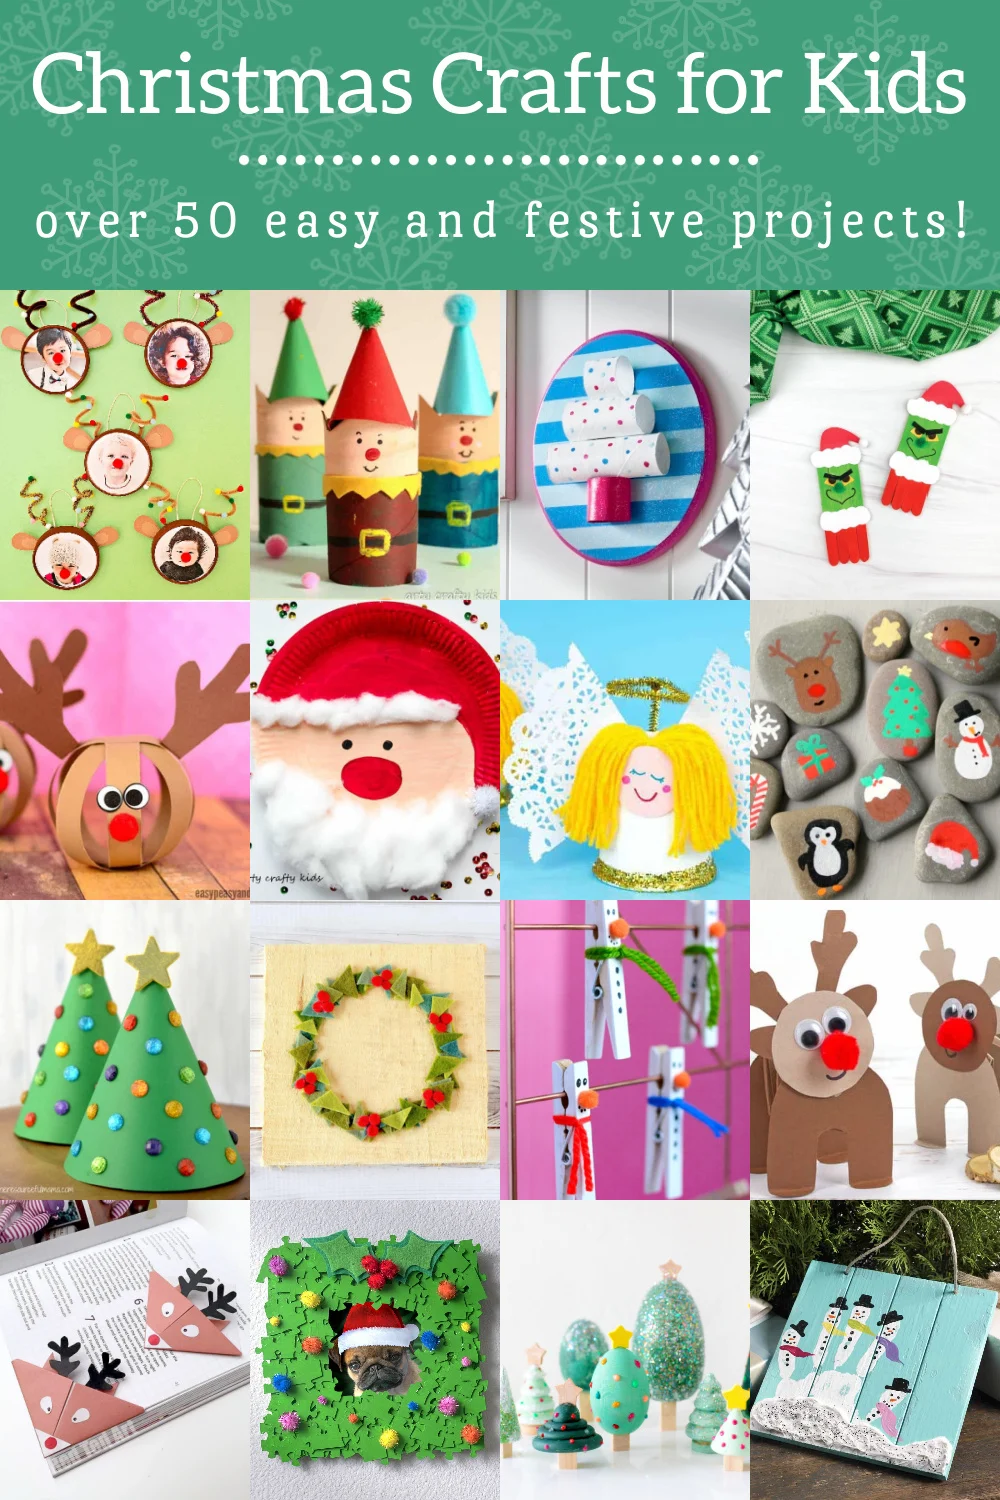 30+ Christmas Crafts for Toddlers and Preschoolers - Happiness is